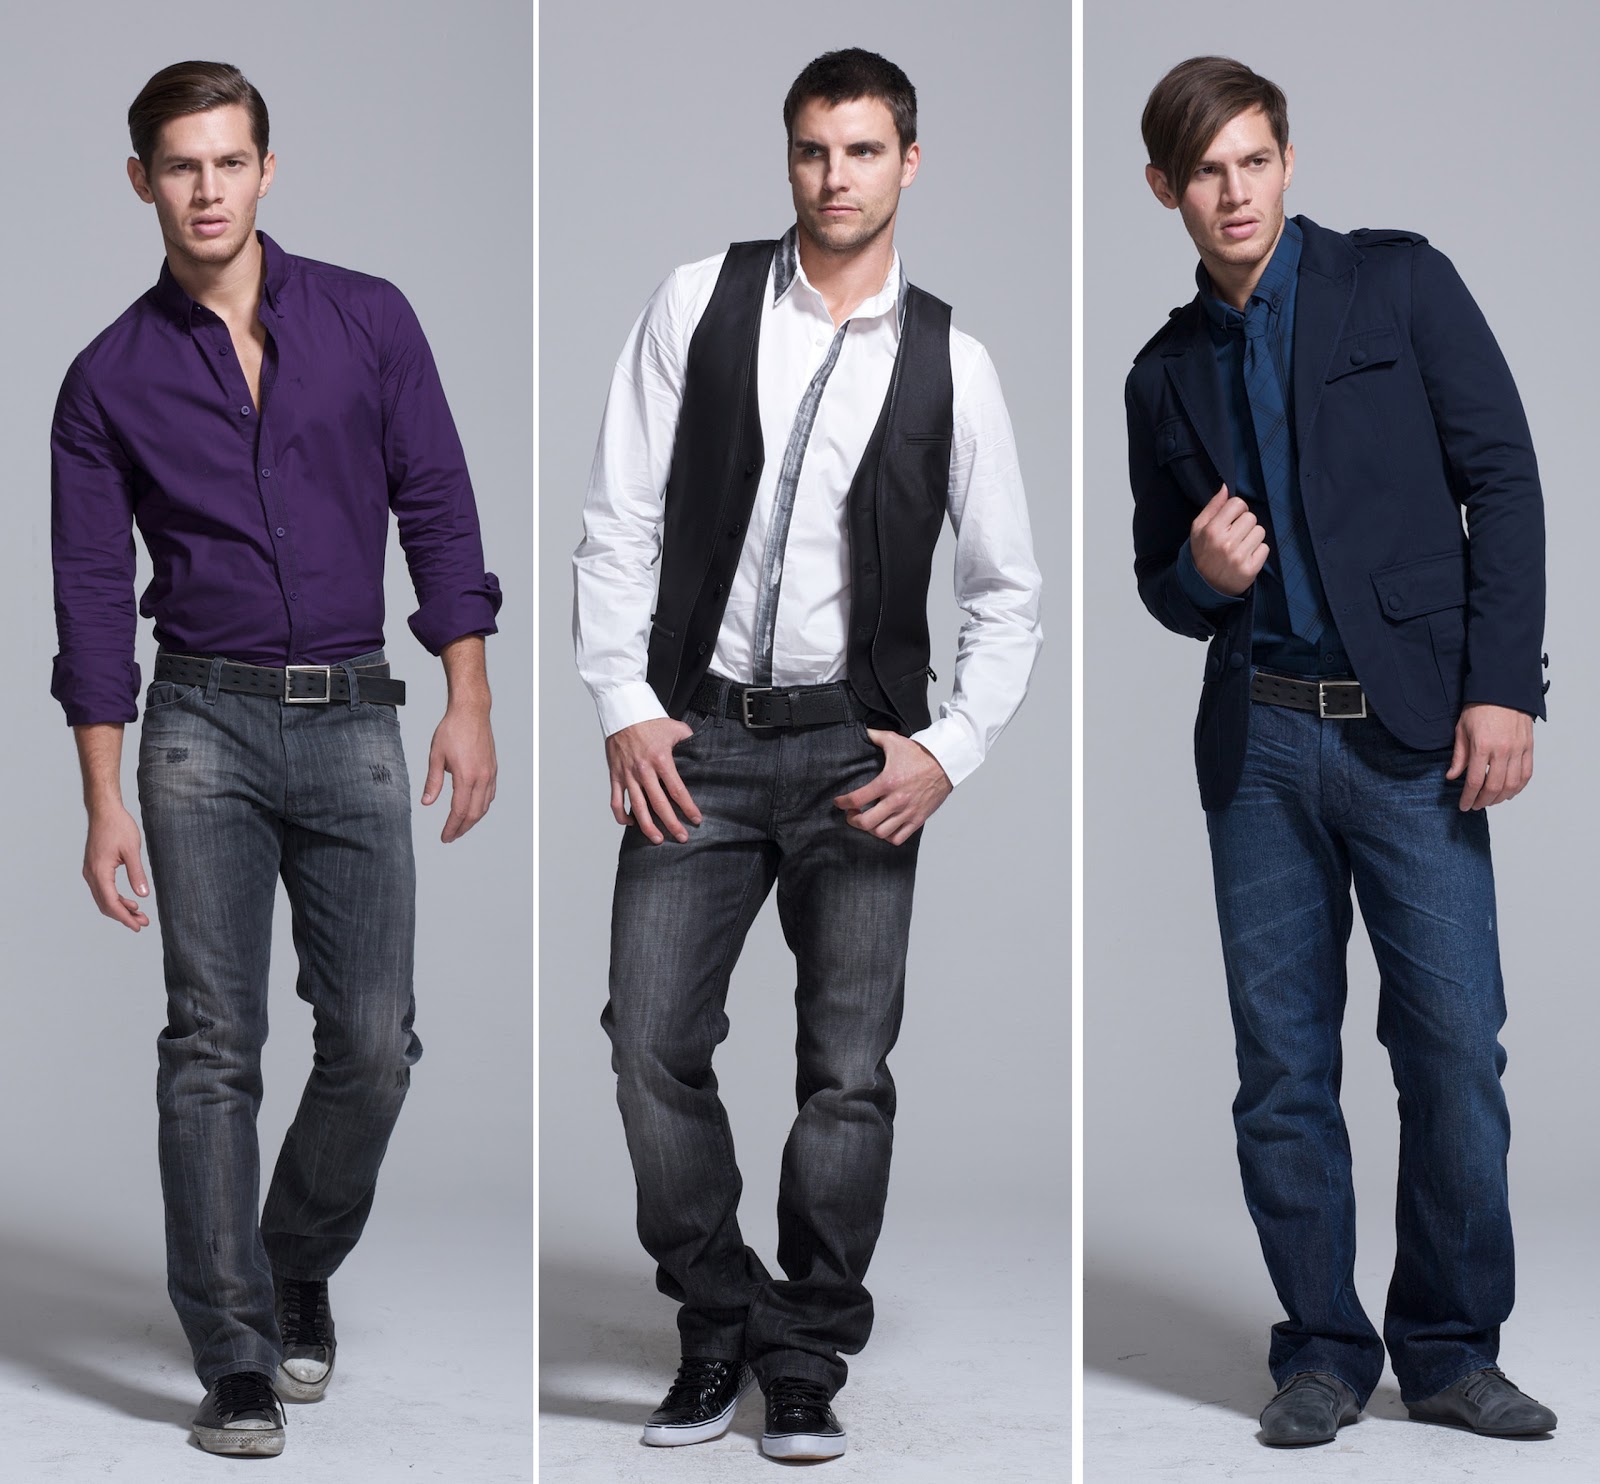 Download this The Latest Men Fashion picture